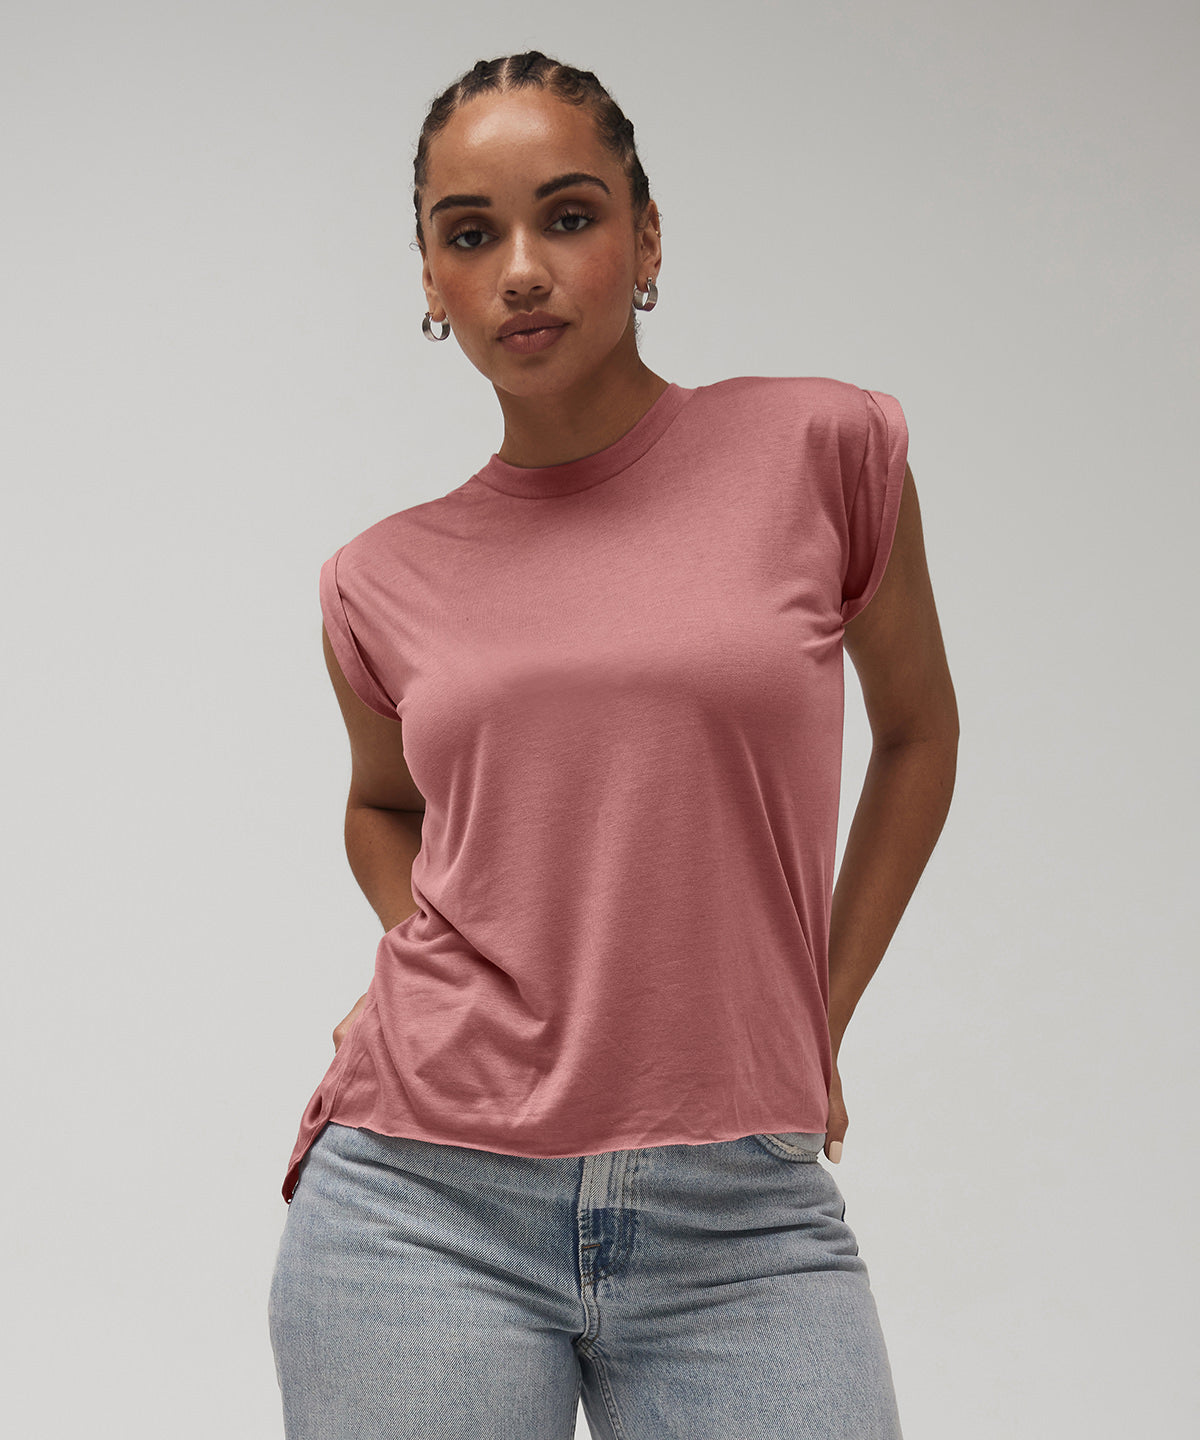 Women's Flowy Muscle Tee With Rolled Cuff